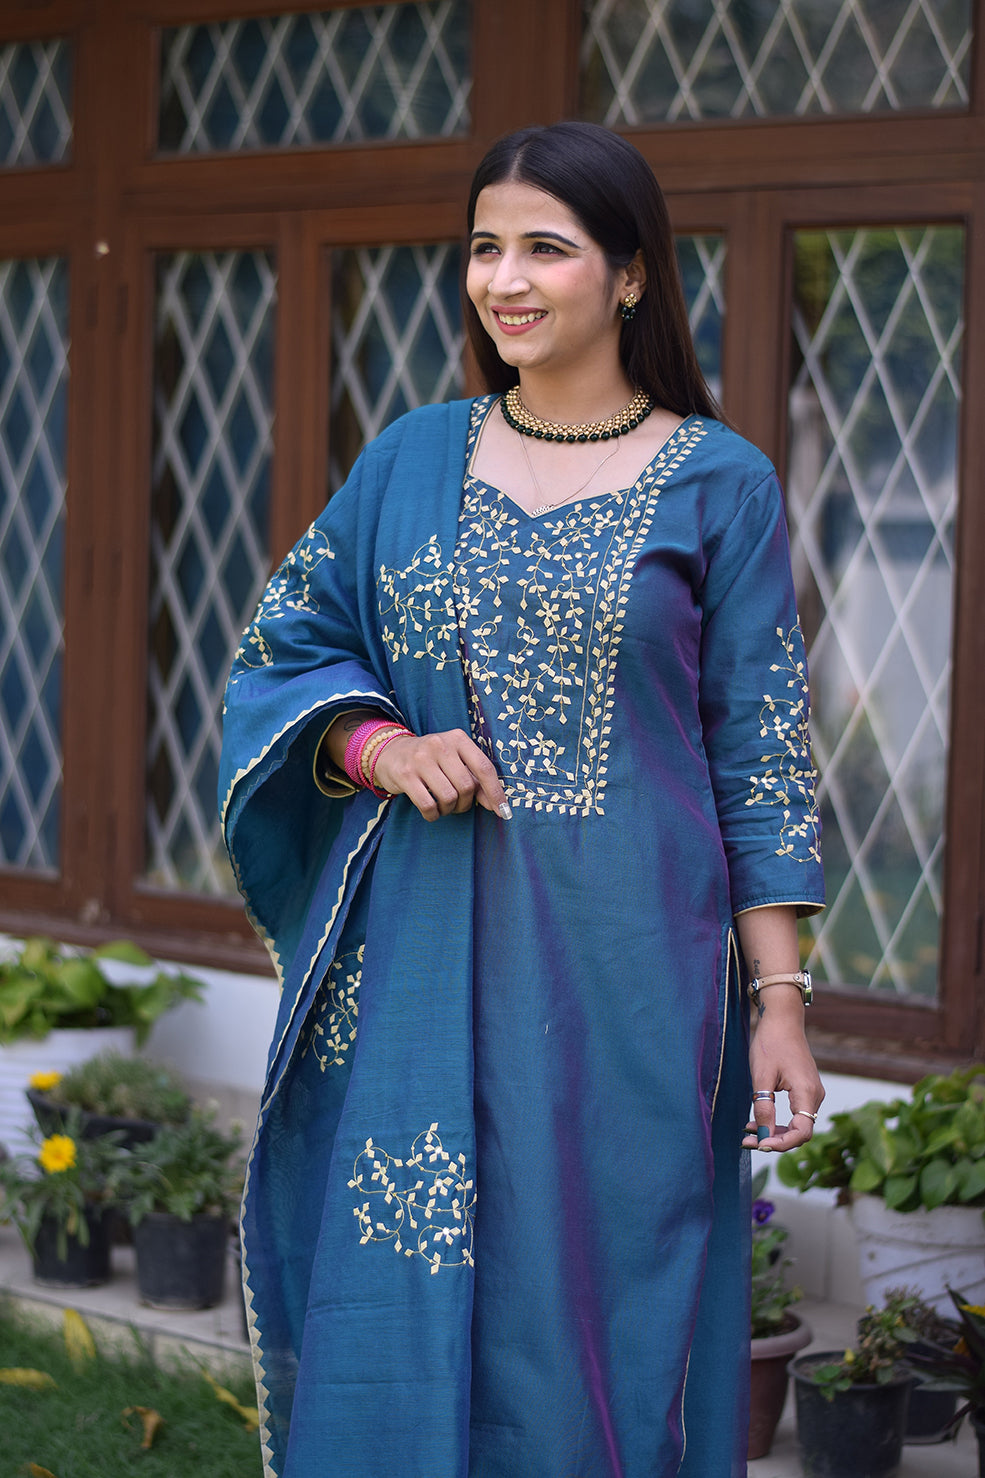 A solo female in a gorgeous blue applique work suit standing against a plain background.